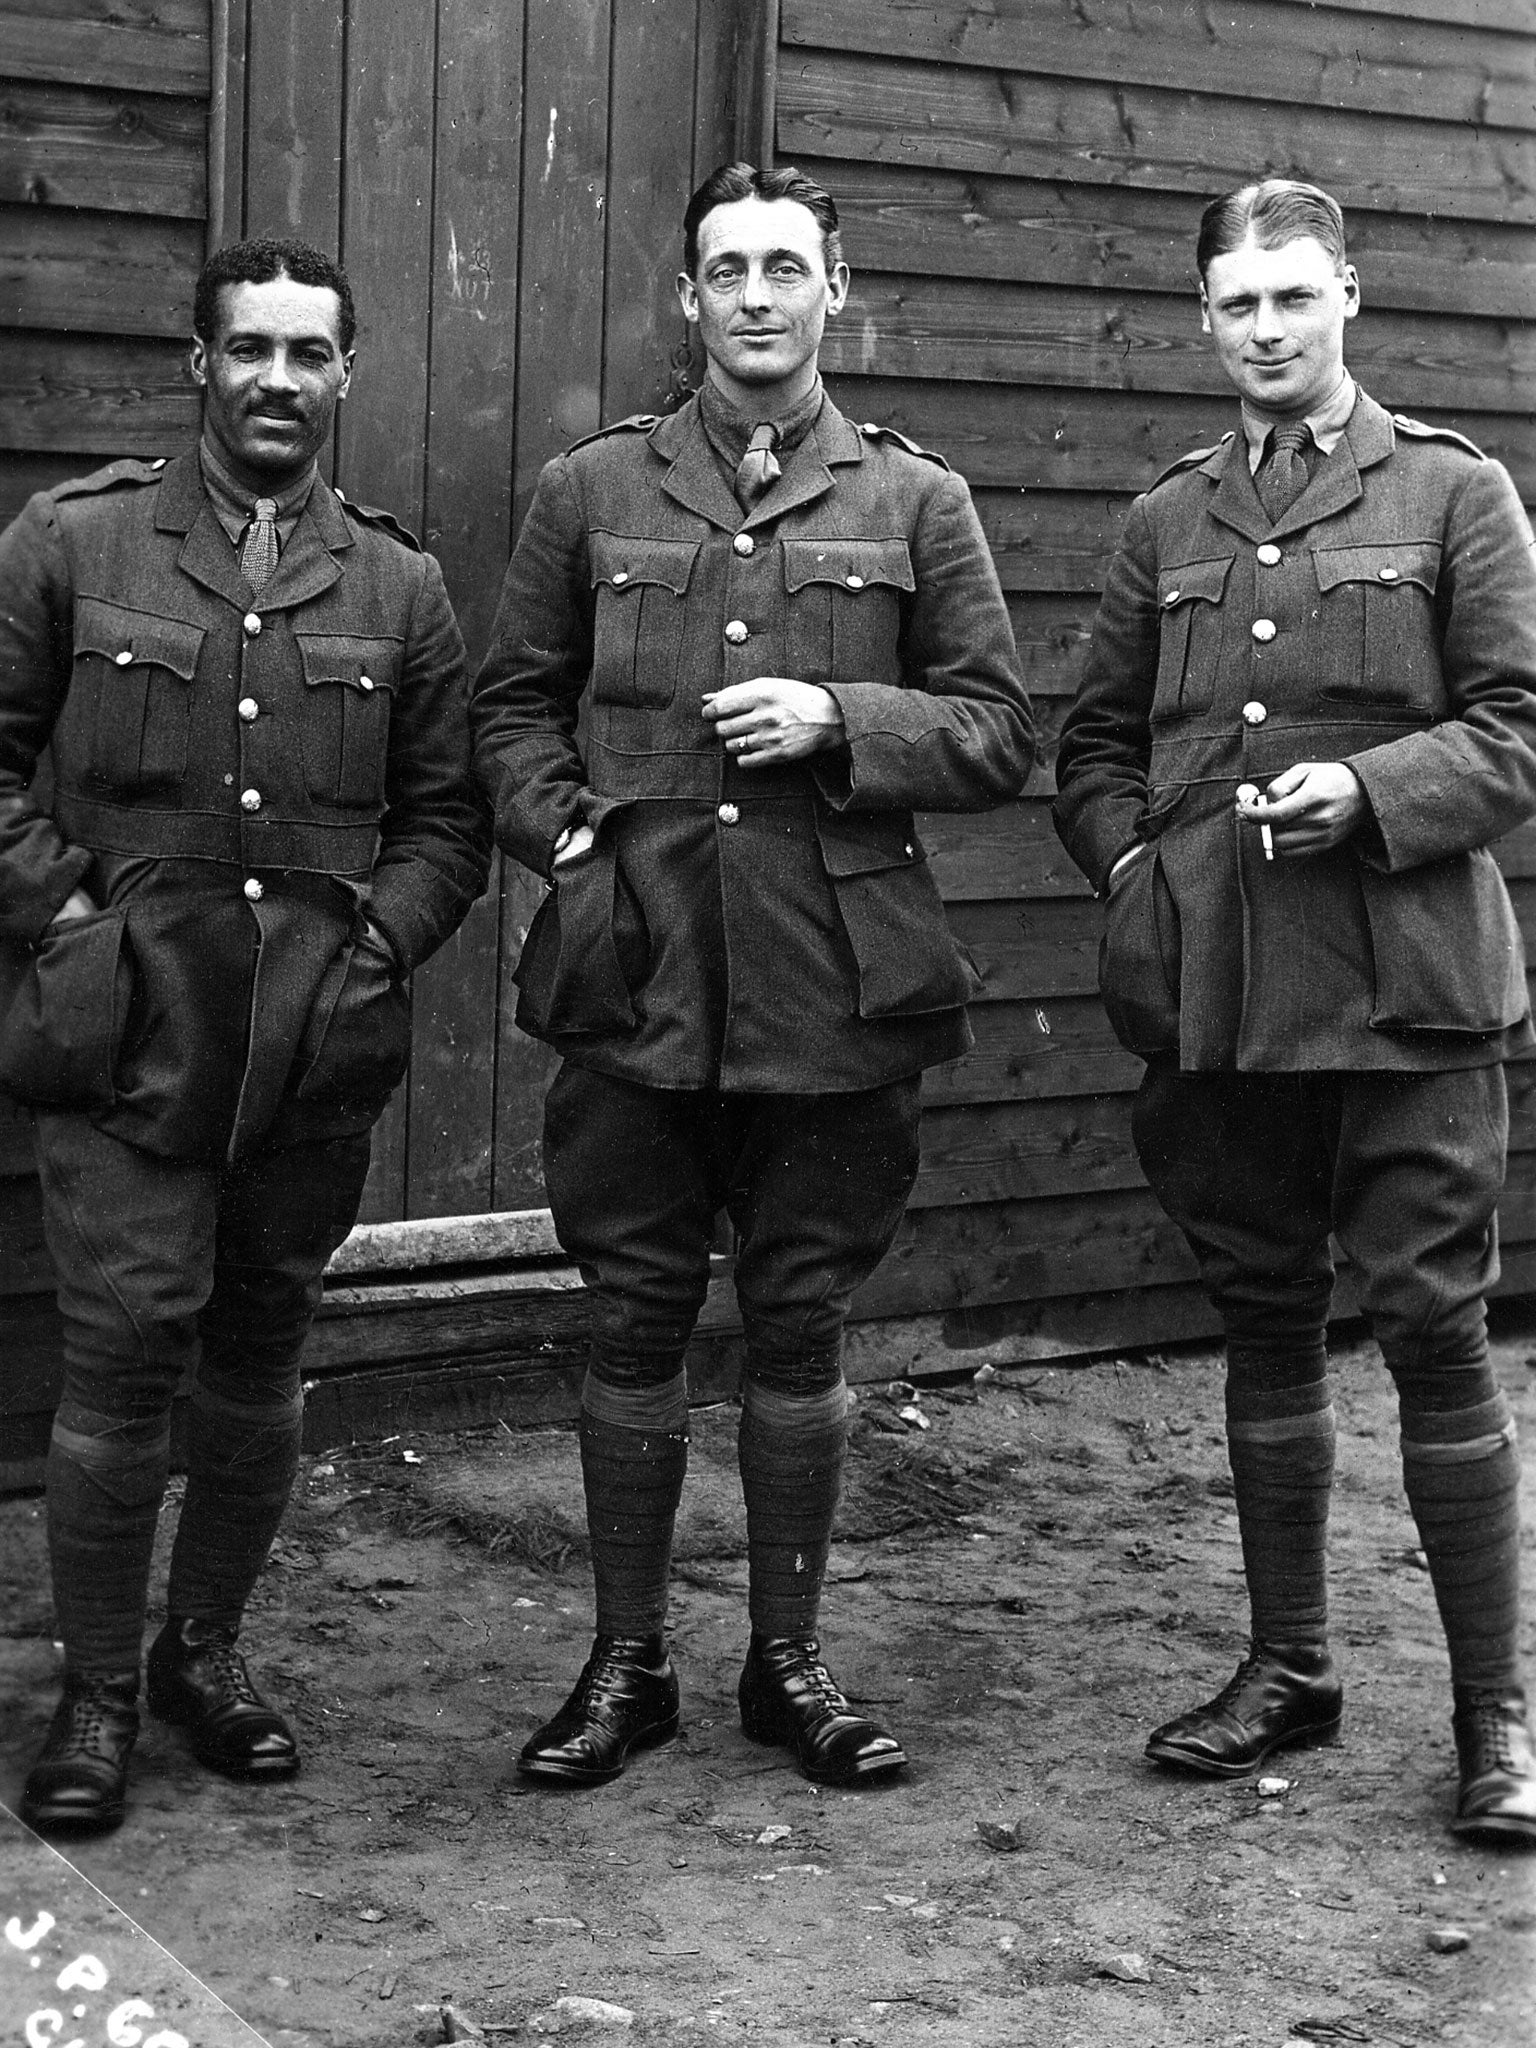 Walter Tull was the first black army officer to lead troops into battle in the First World War